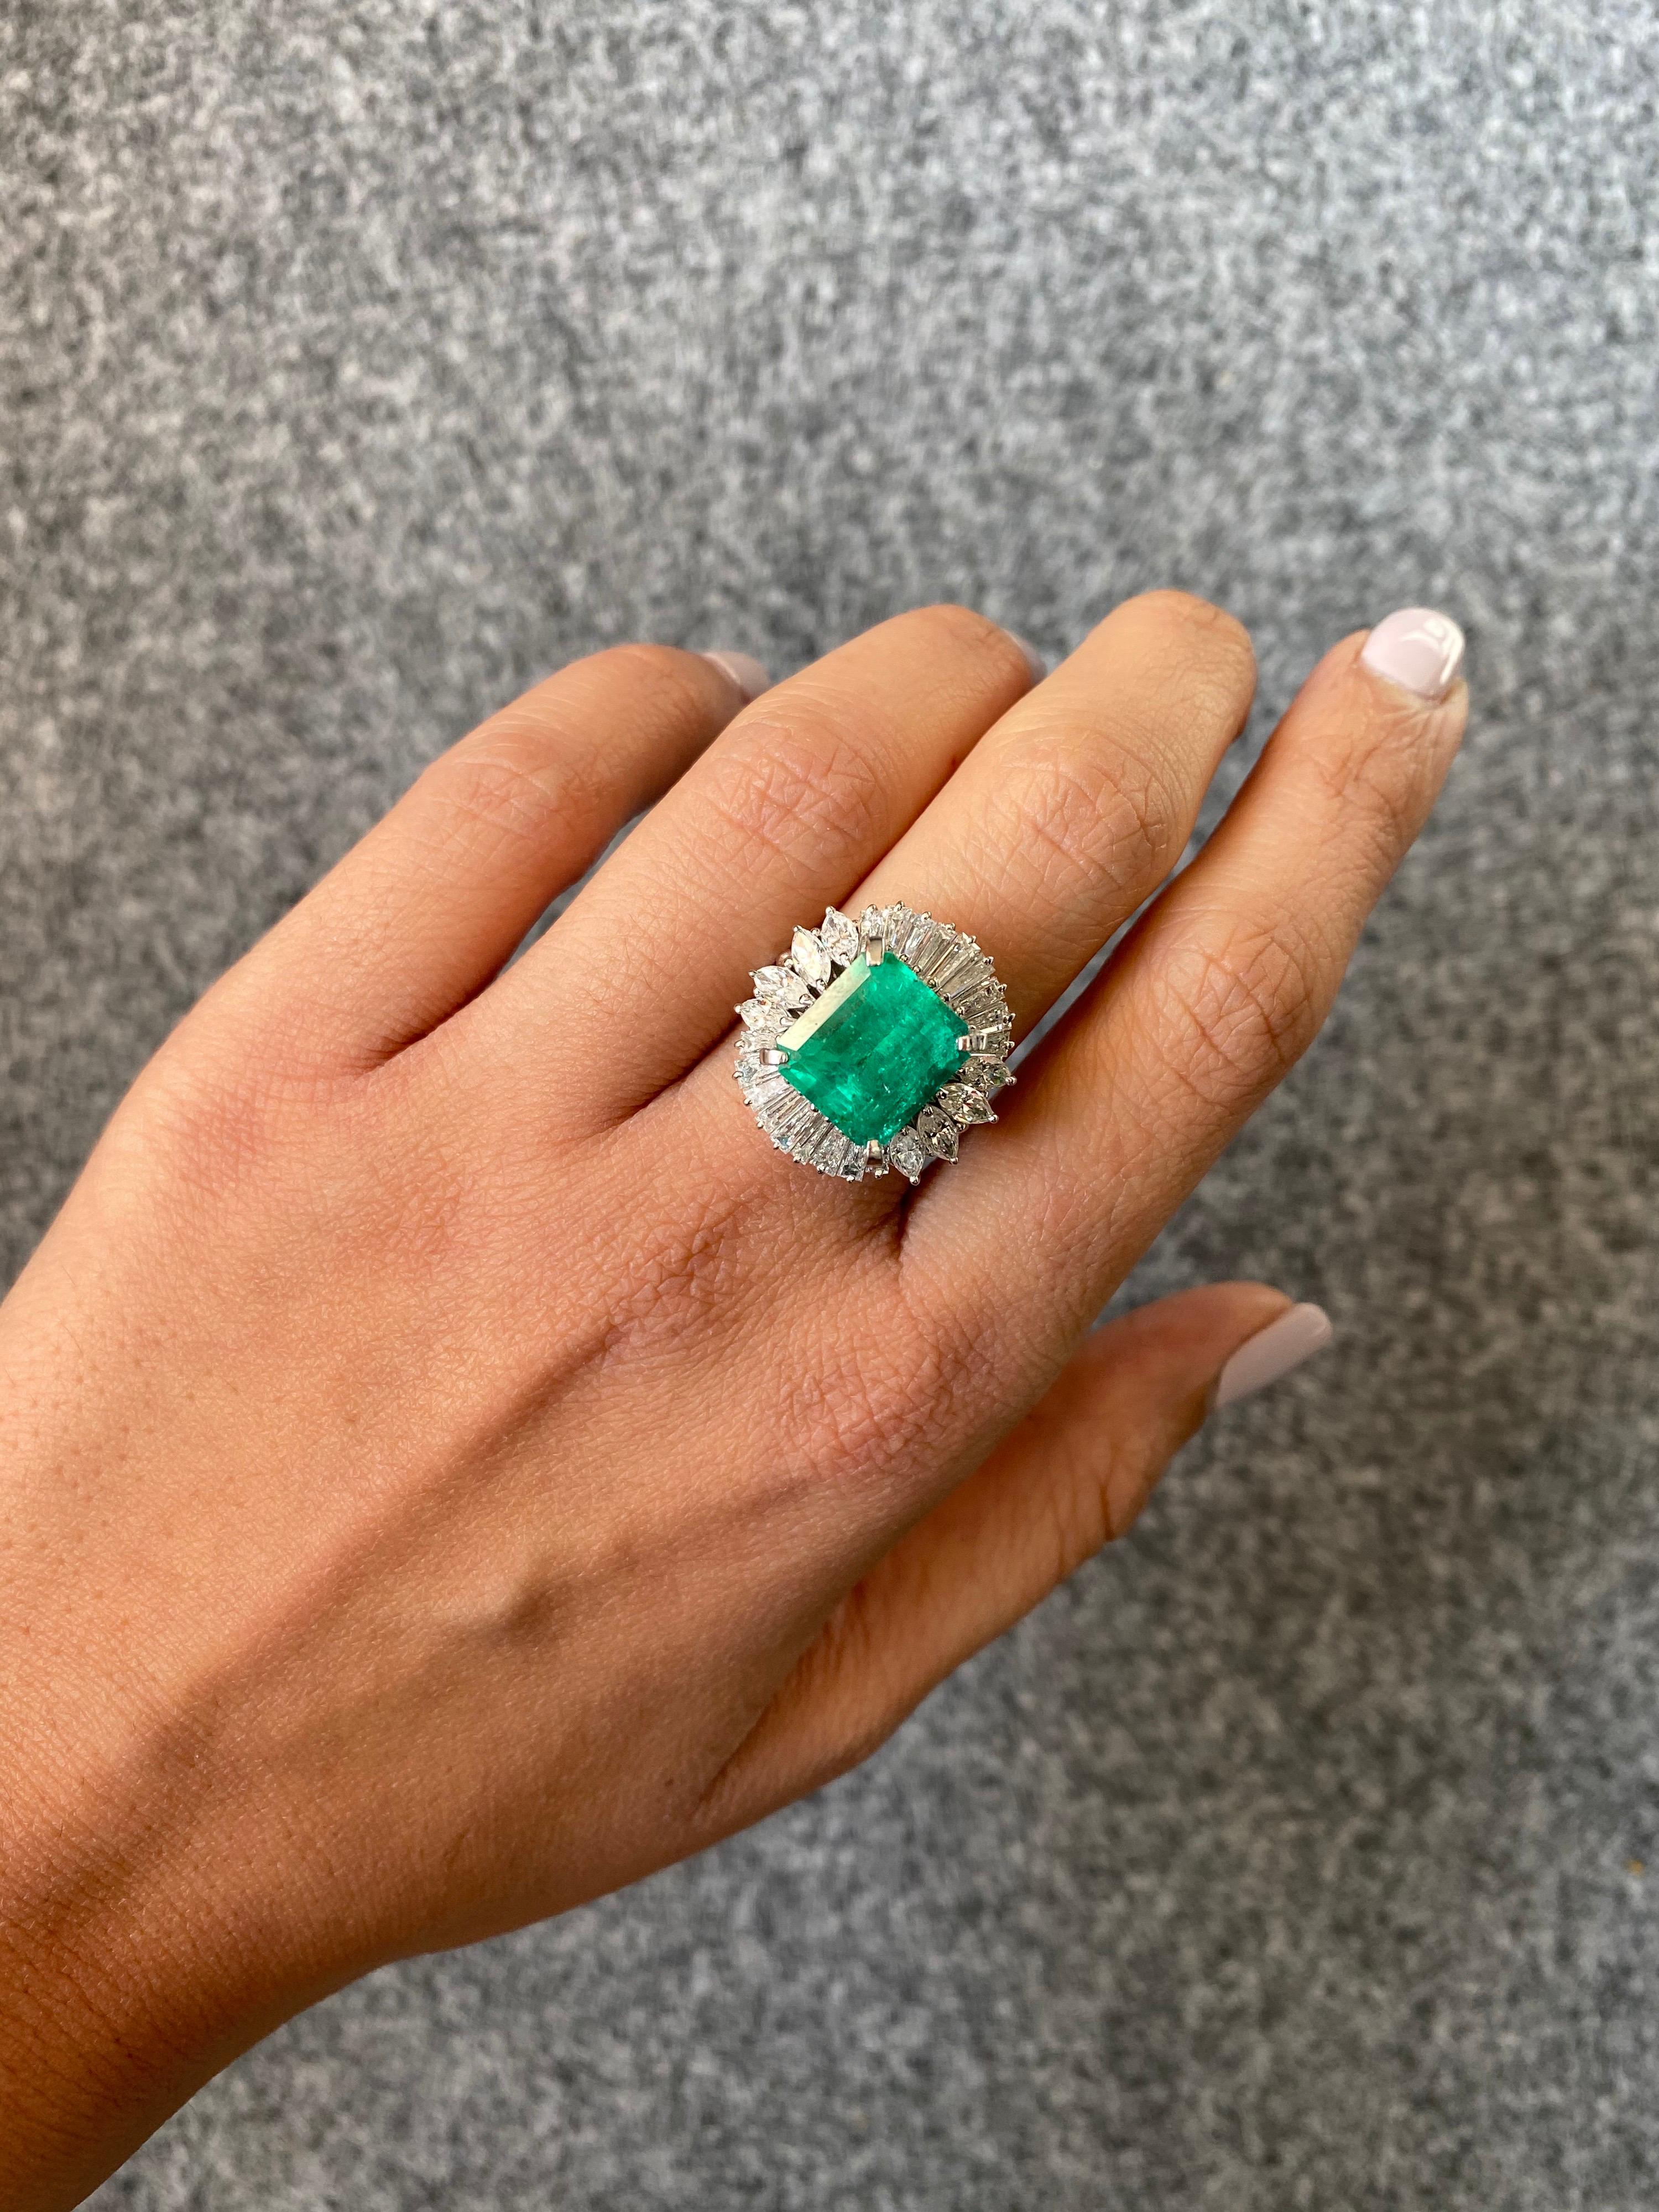 Art Deco Certified 6.85 Carat Colombian Emerald, Diamond and Platinum Ring